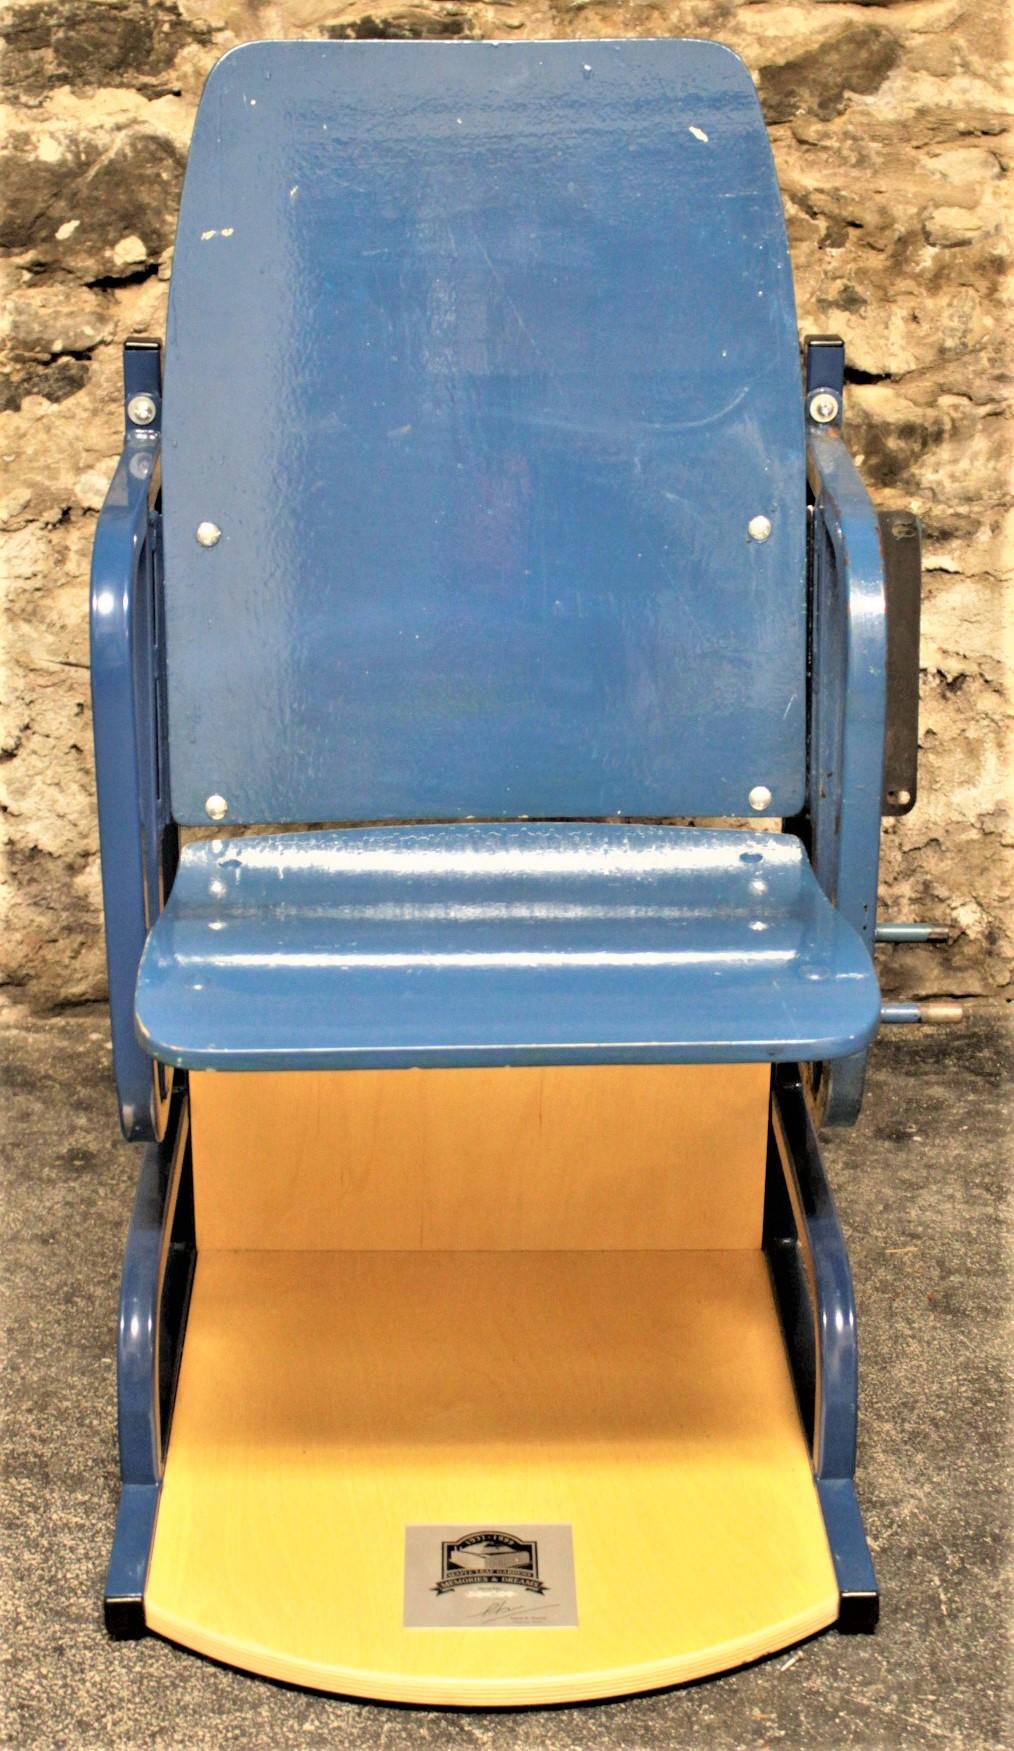 maple leaf gardens seats for sale